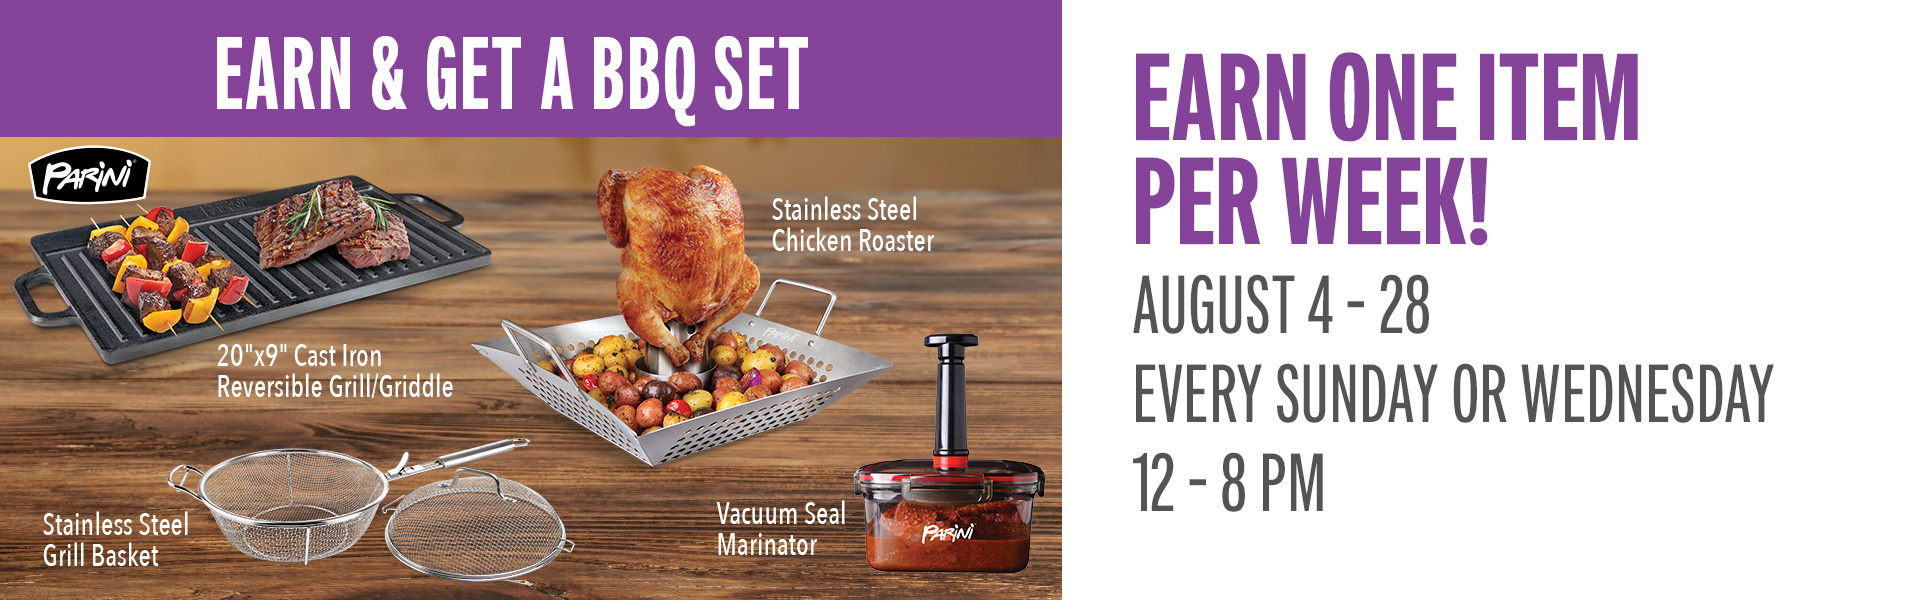 Earn 75 point on Sundays or Wednesdays and receive a BBQ set item! Visit the promotions booth beginning at 12 pm to claim.